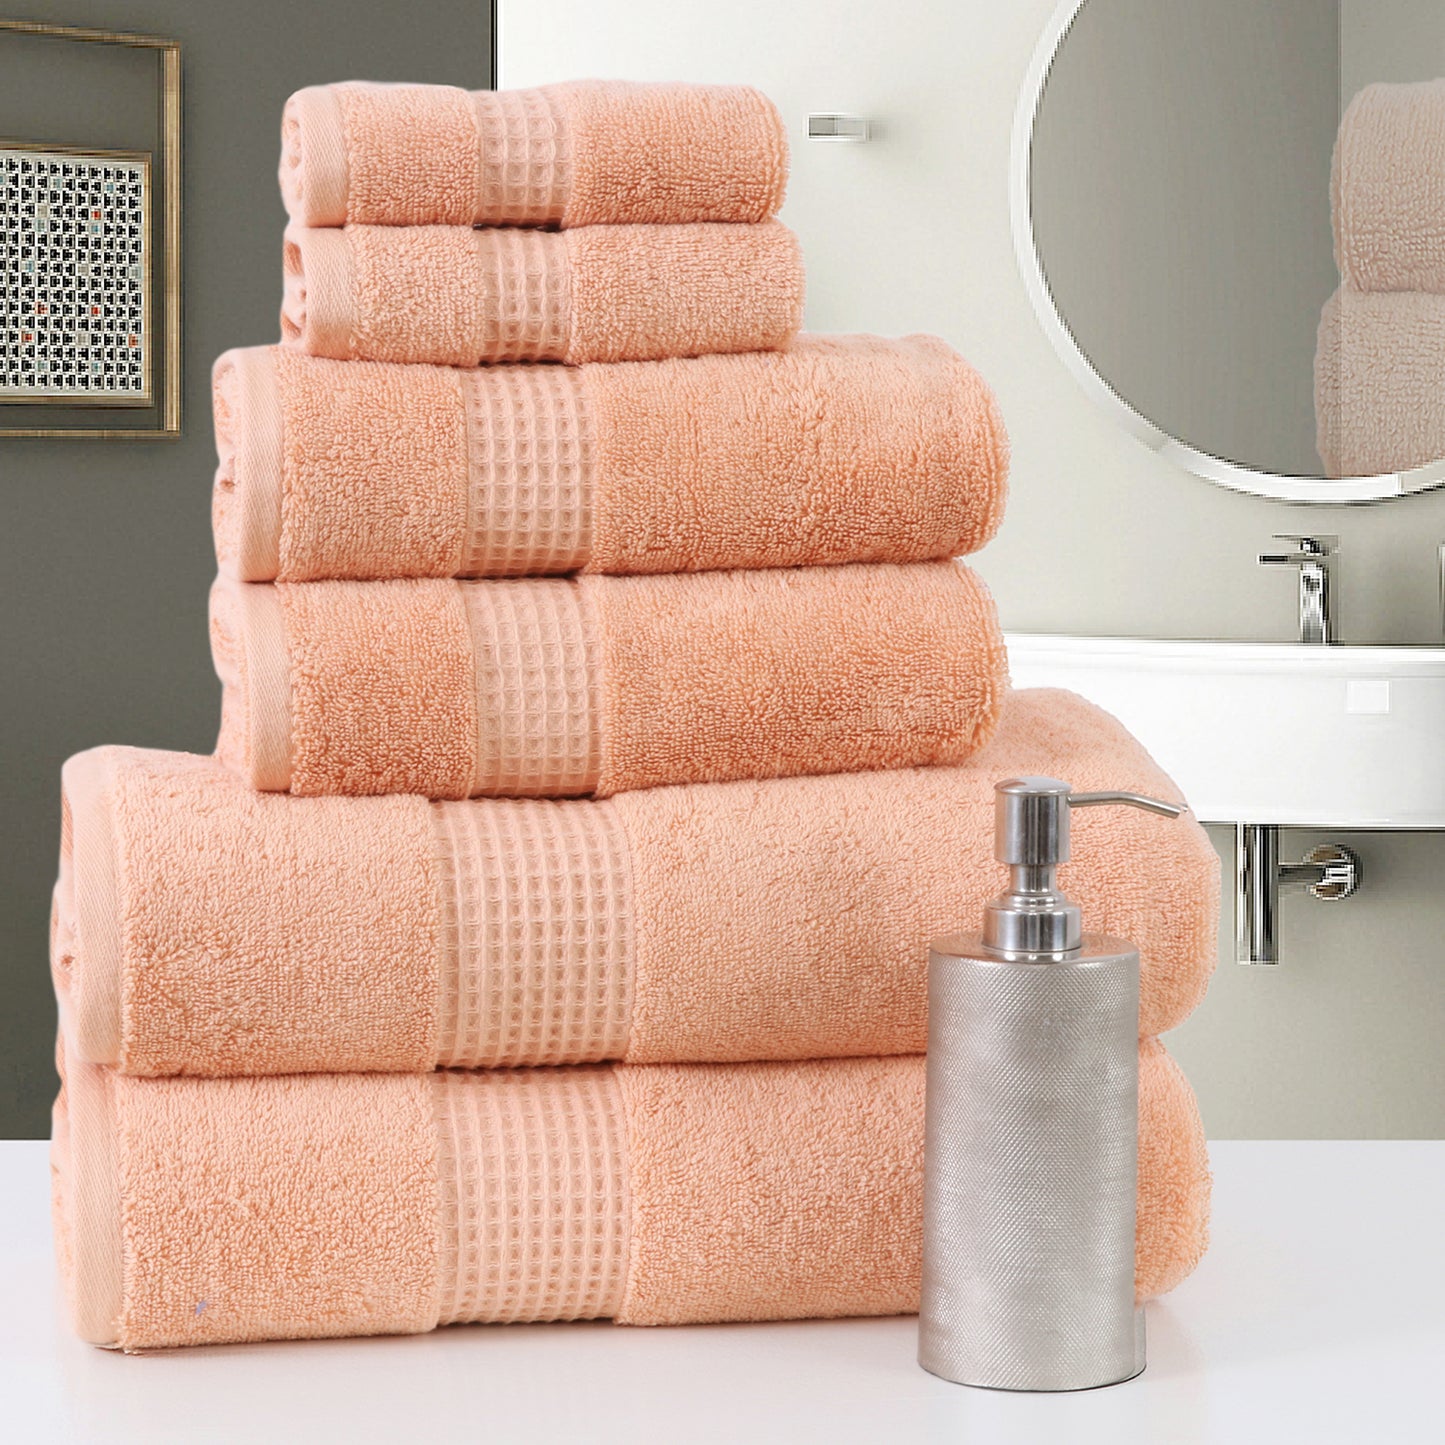 Combo Deal-Terry Towel 6 pc set and Honeycomb Bath rug 17x24/21x34 - TreeWool Bundle Deal#color_peach